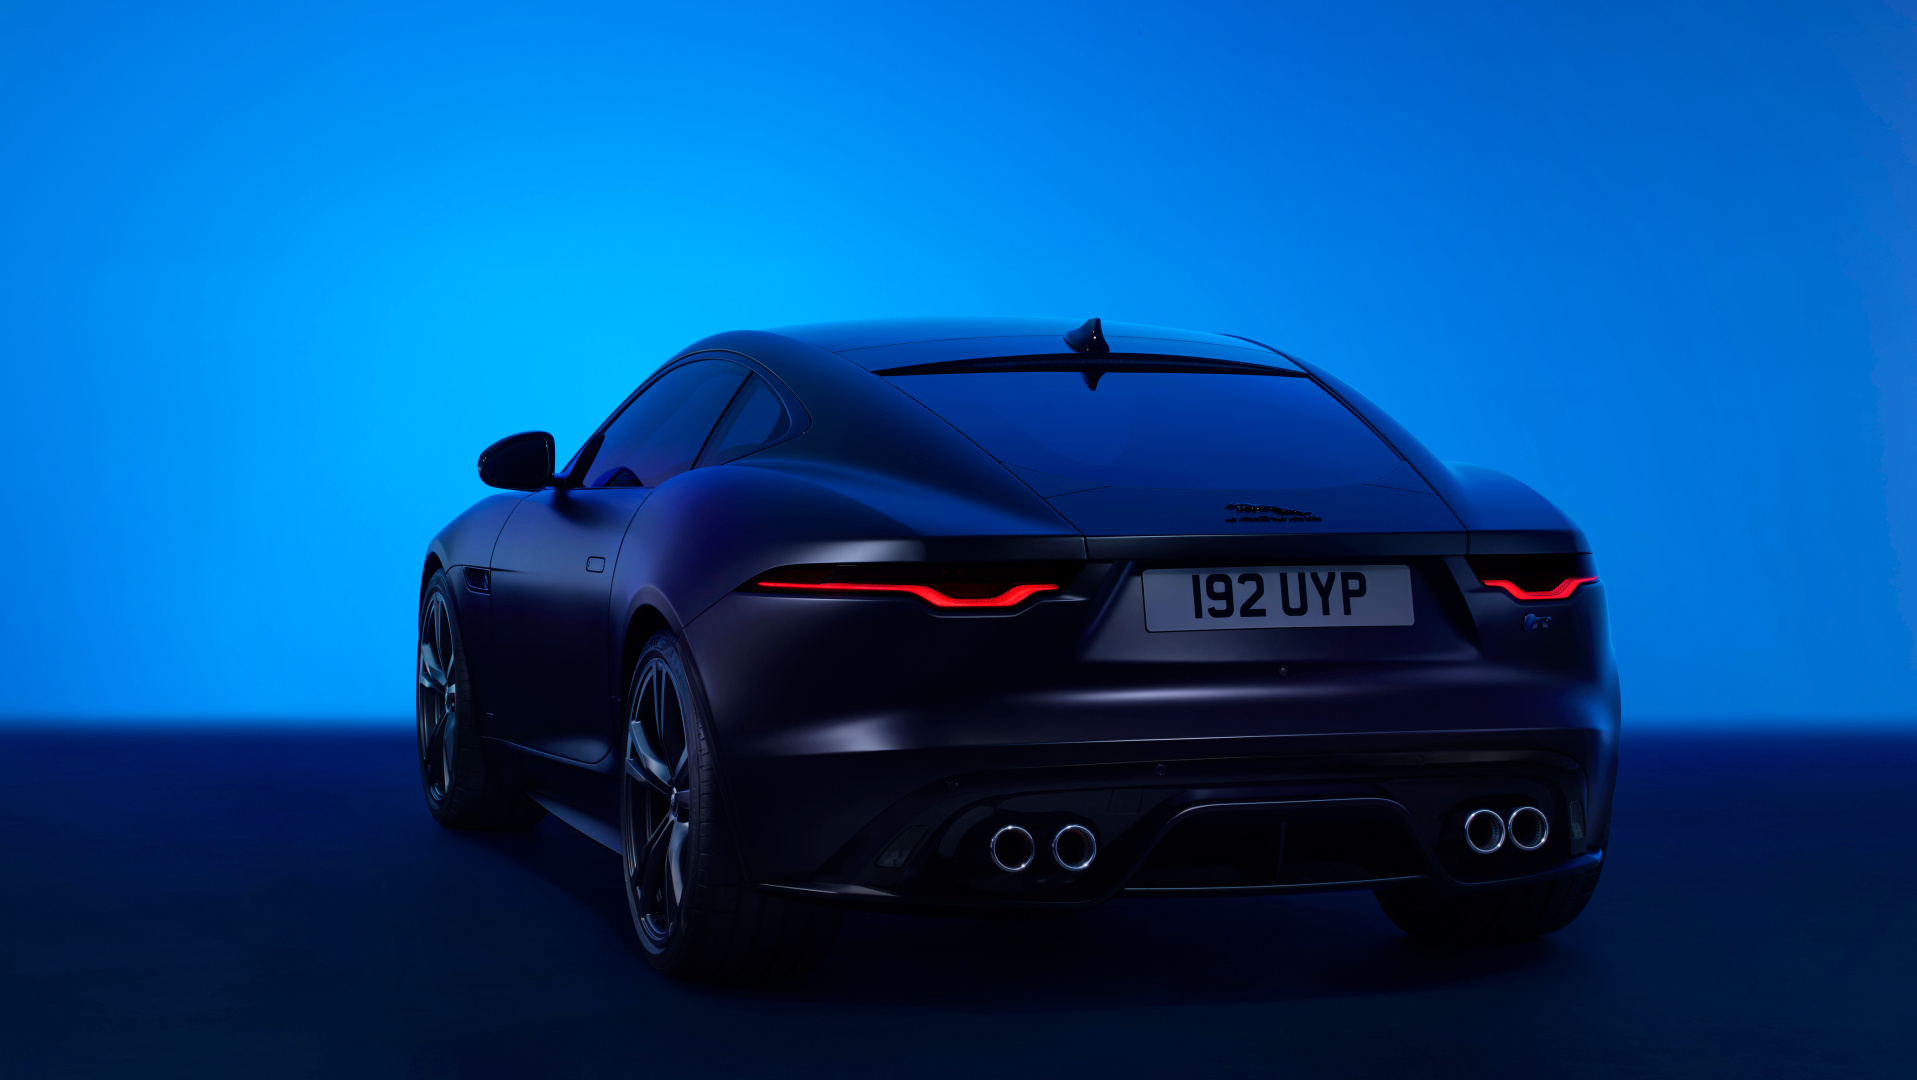 SMALL_003_24MY_Jag_F-TYPE_R_75_Coupe_Exterior_Rear_3Qr_Studio_111022